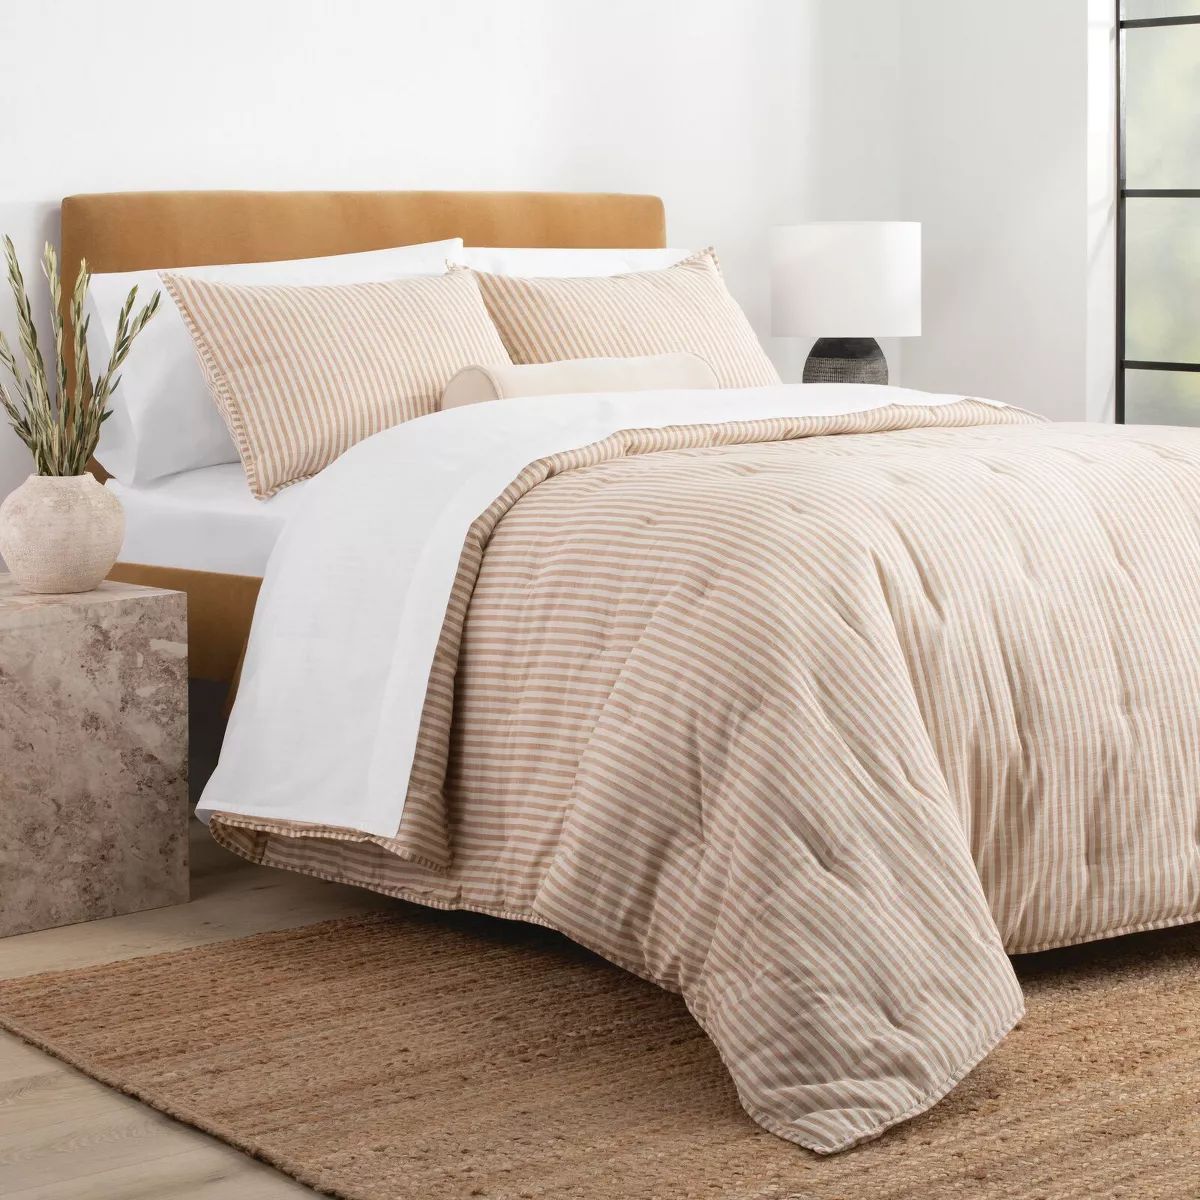 Nate Home by Nate Berkus Textured Shapes Cotton Comforter Quilt Set | Target